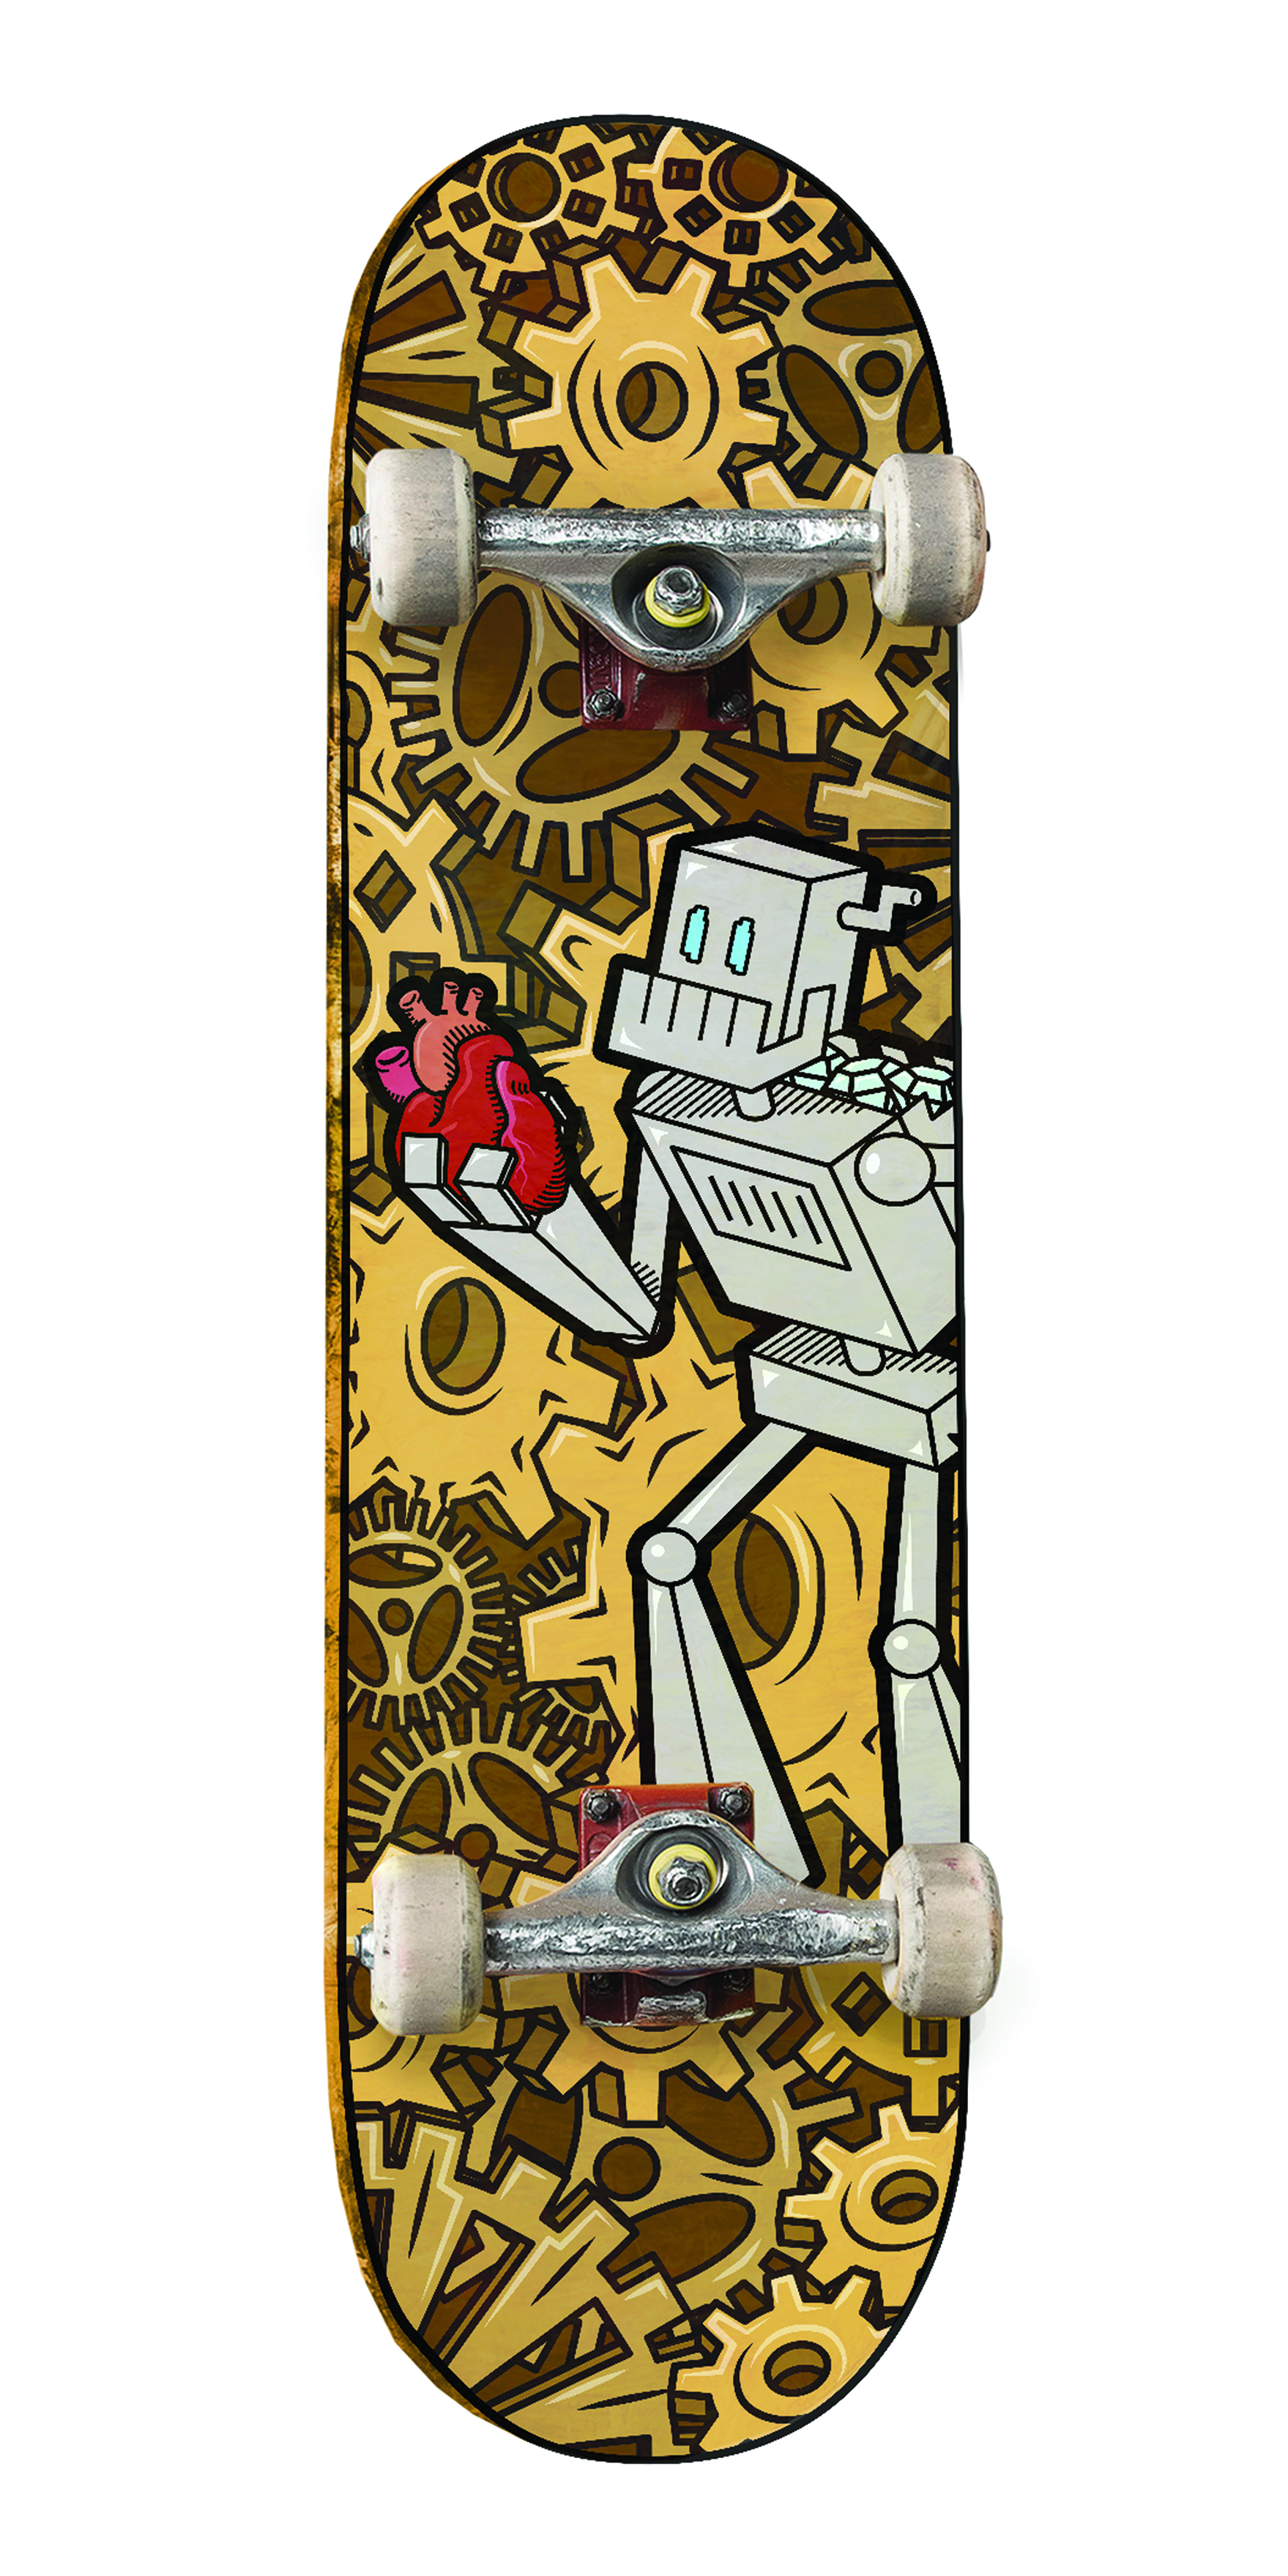 Skateboard with Robot Character